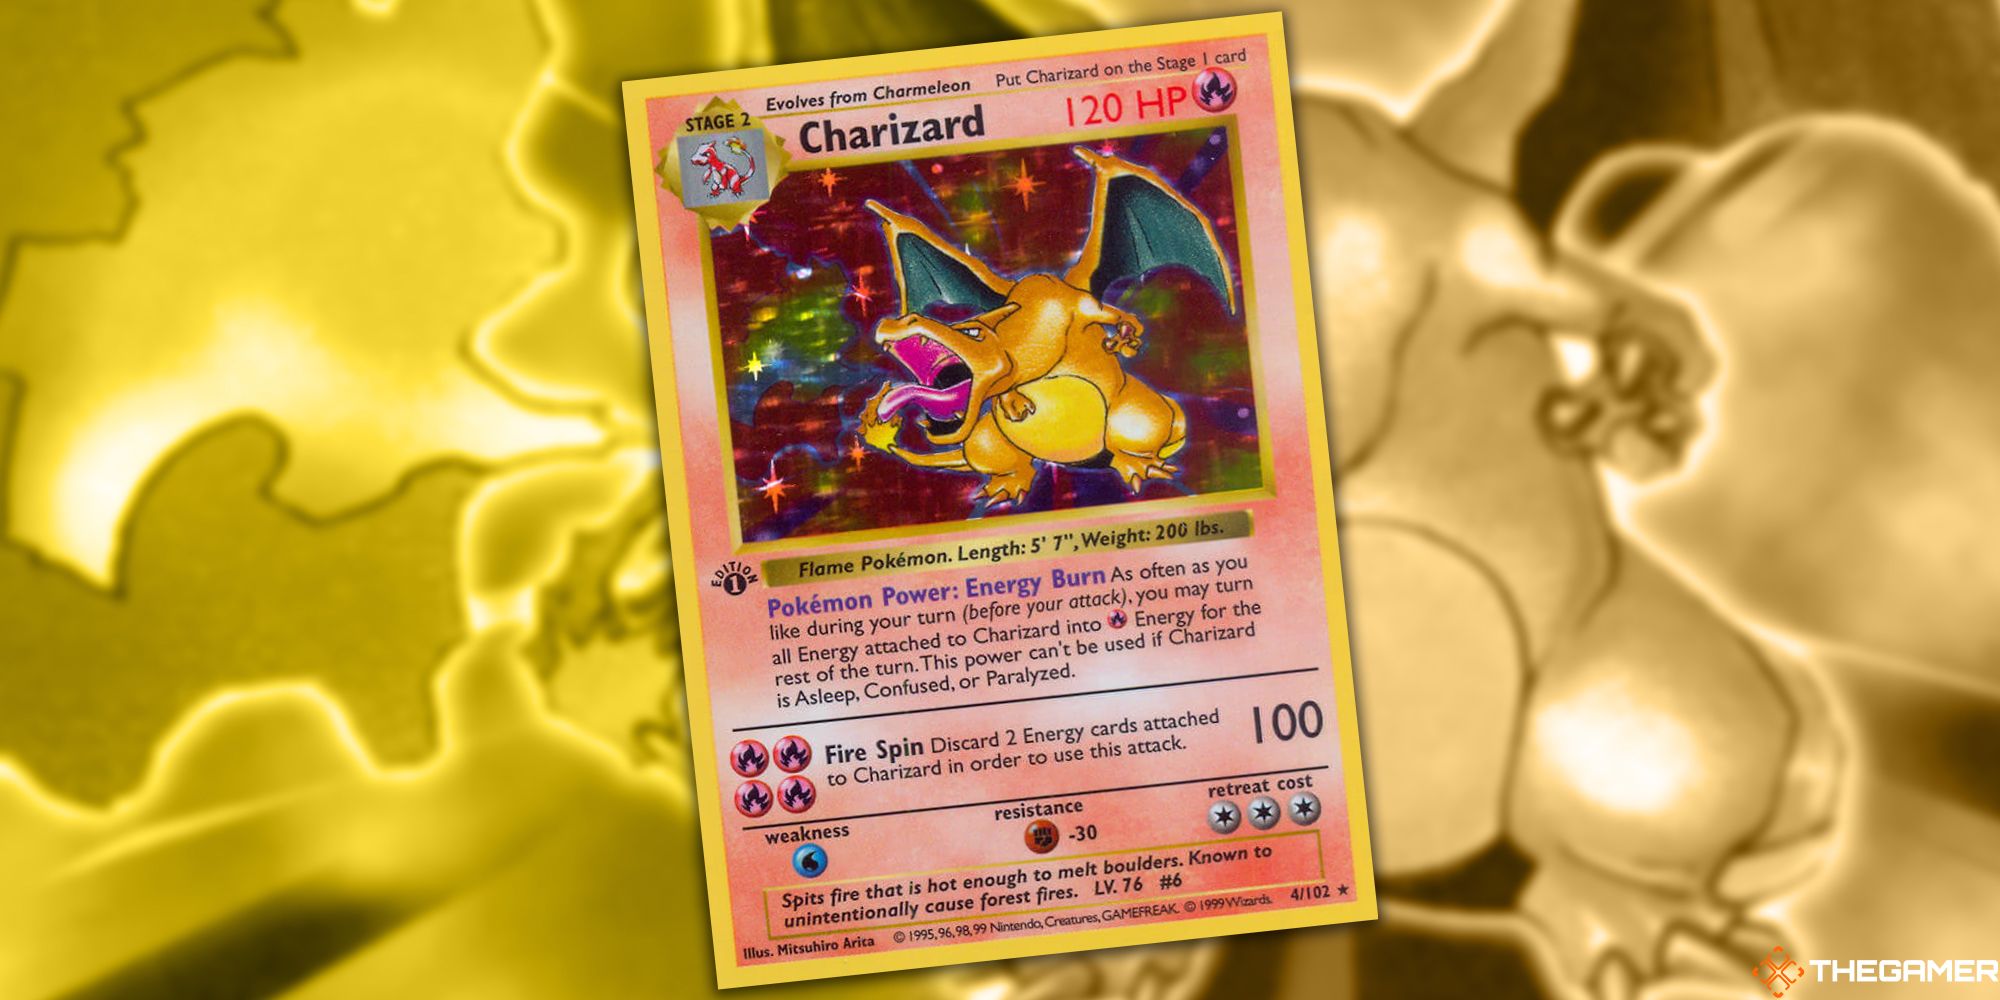 A rare Charizard card to become most expensive Pokémon card ever